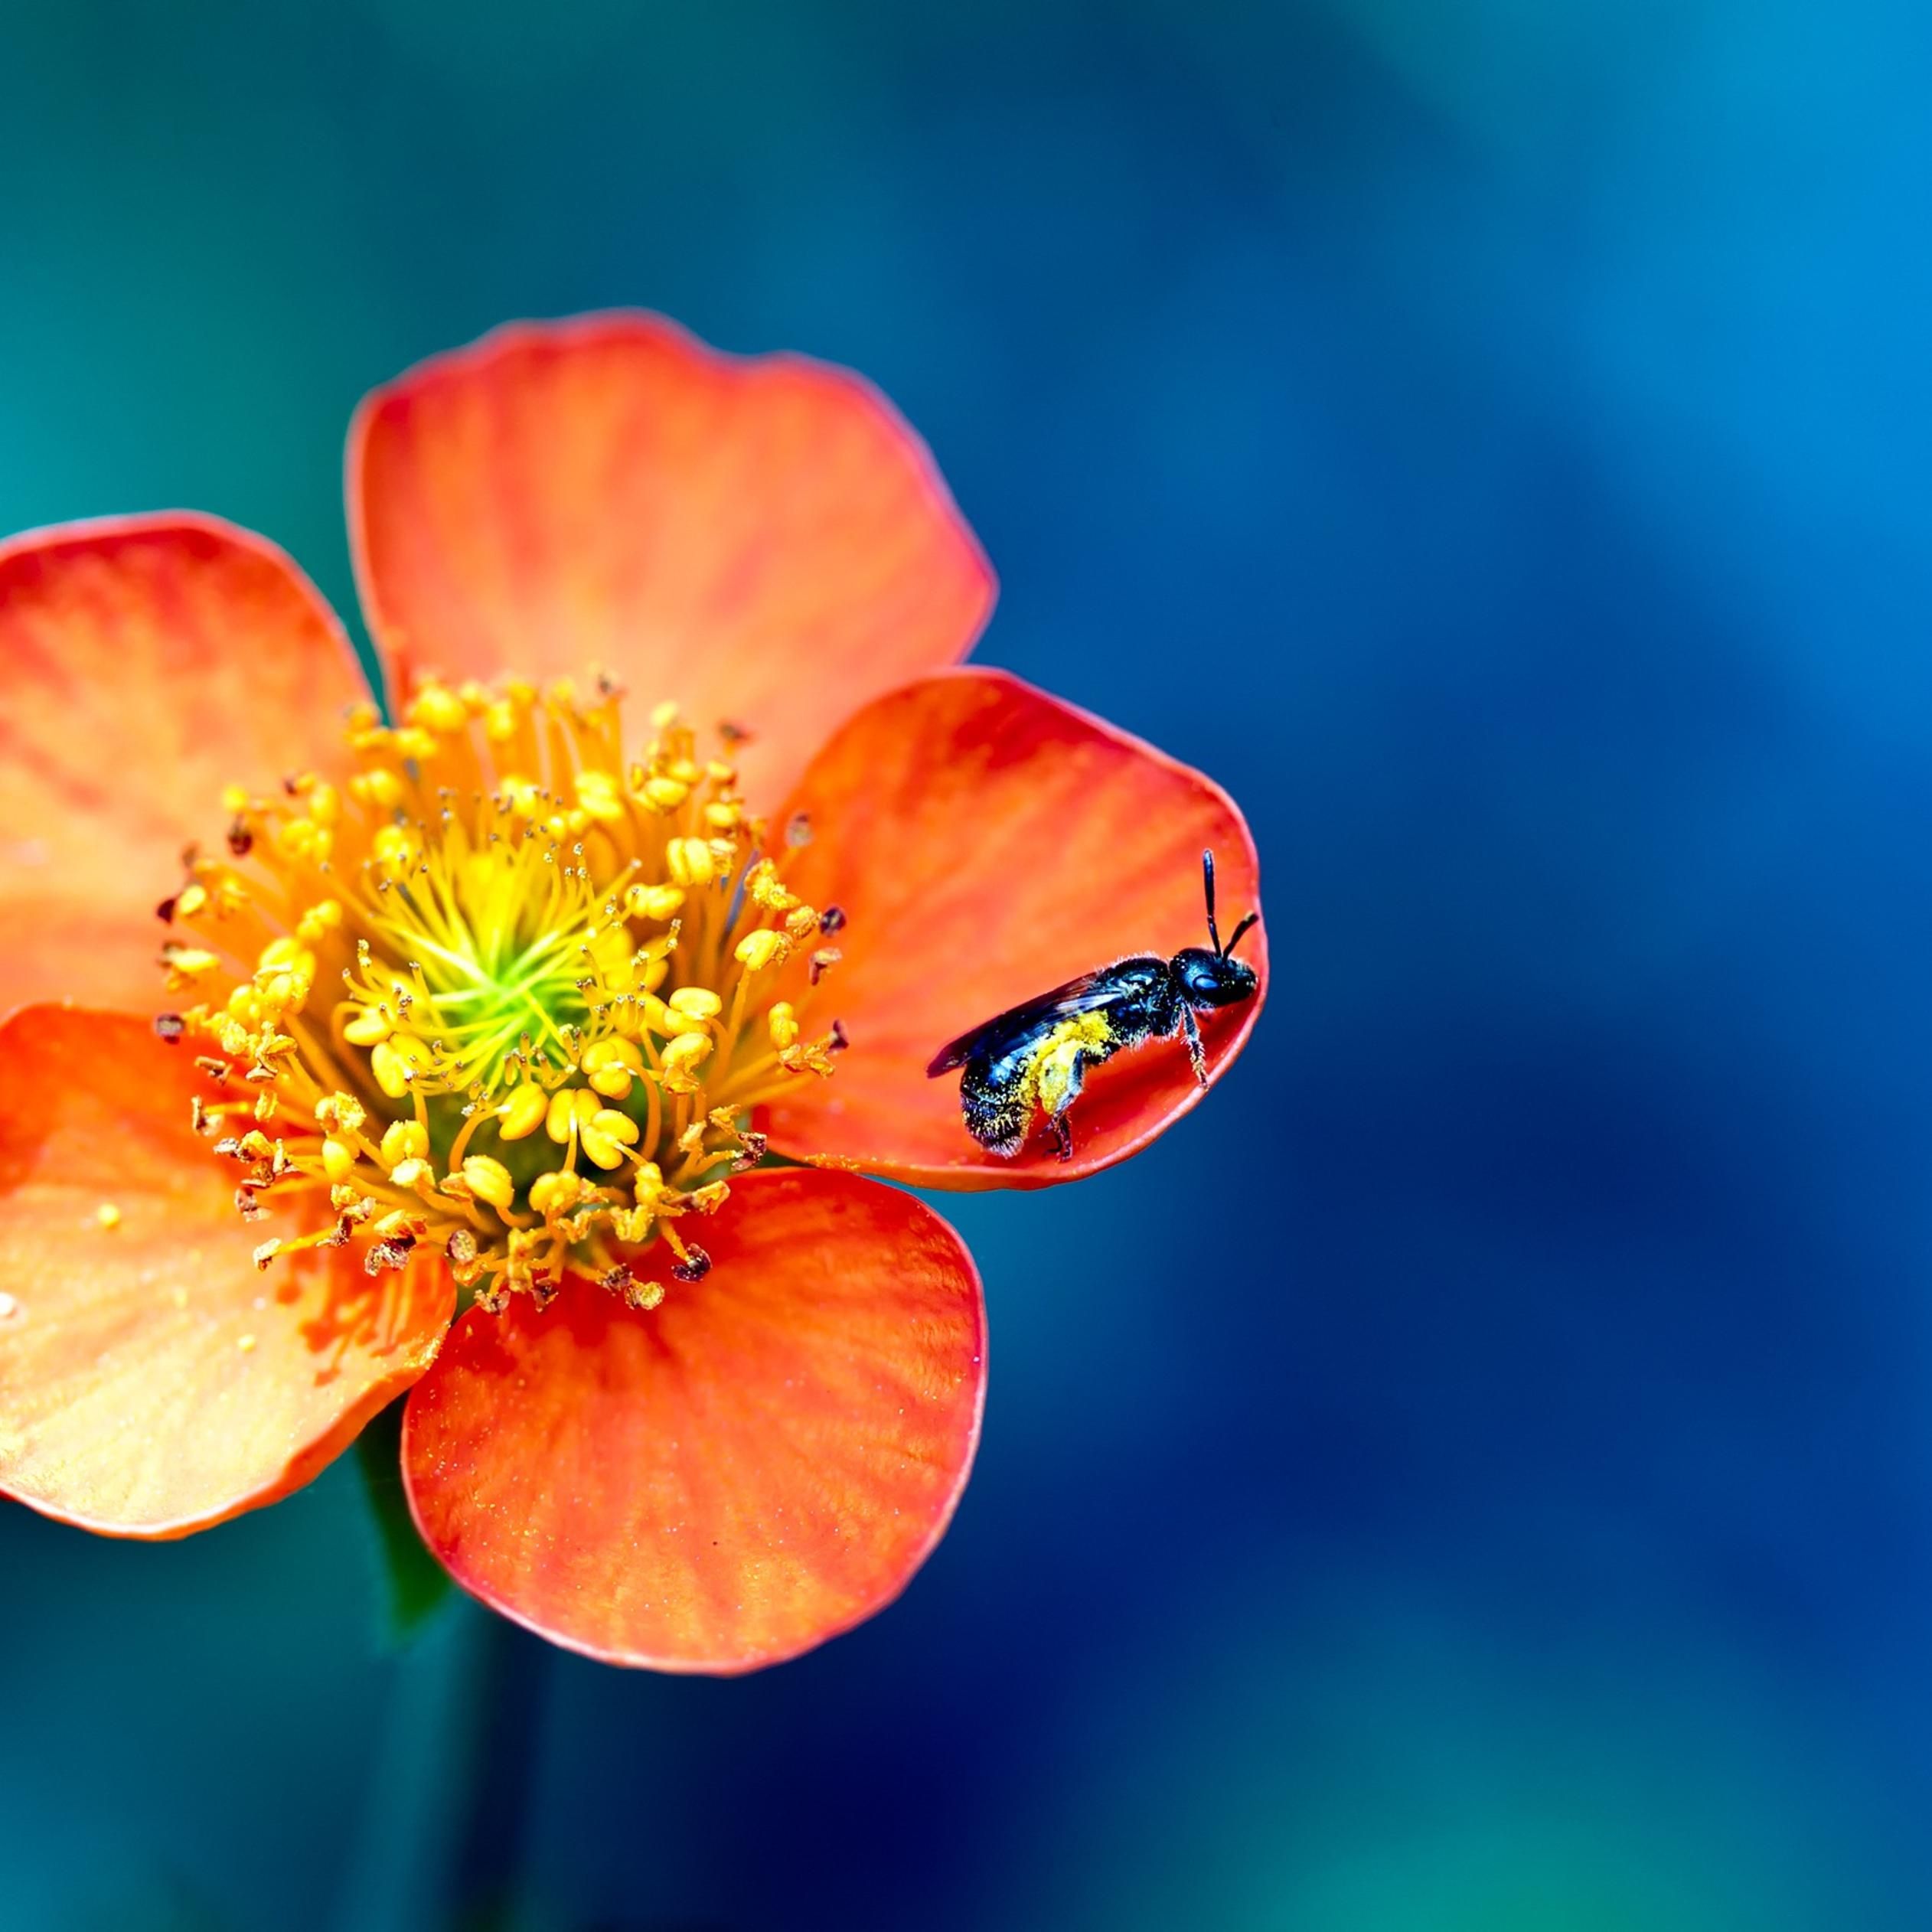 Little insect on a beautiful spring flower